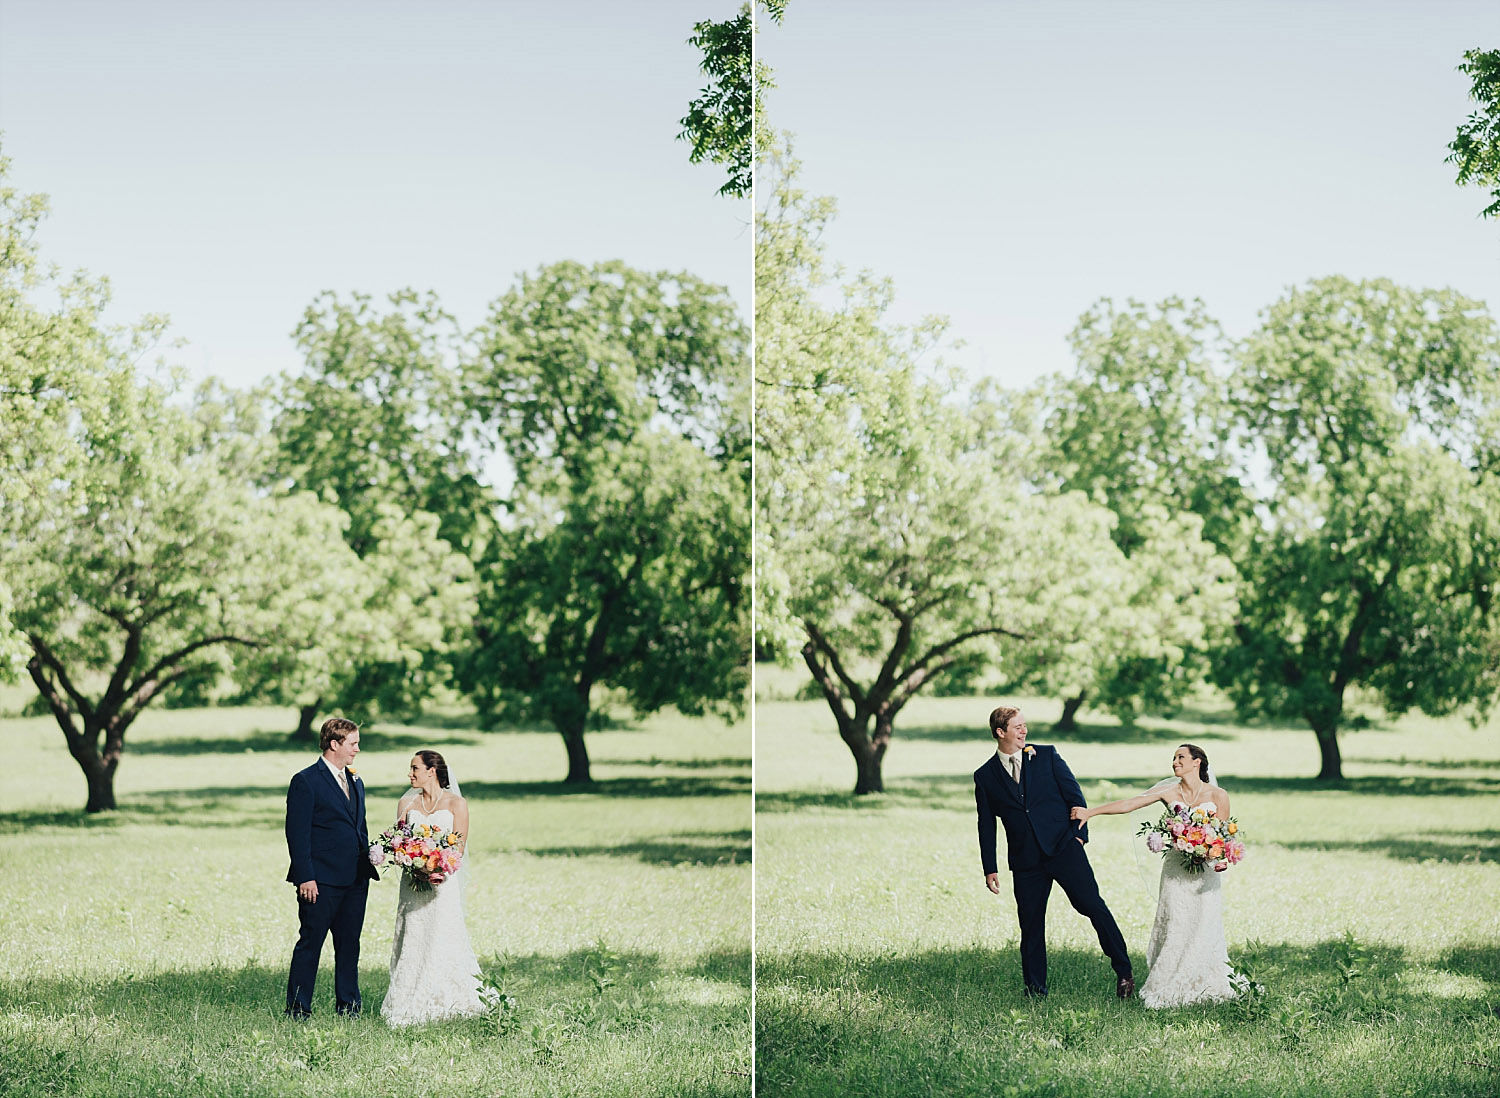 The Orchard Azle wedding bride and groom outdoors in grass